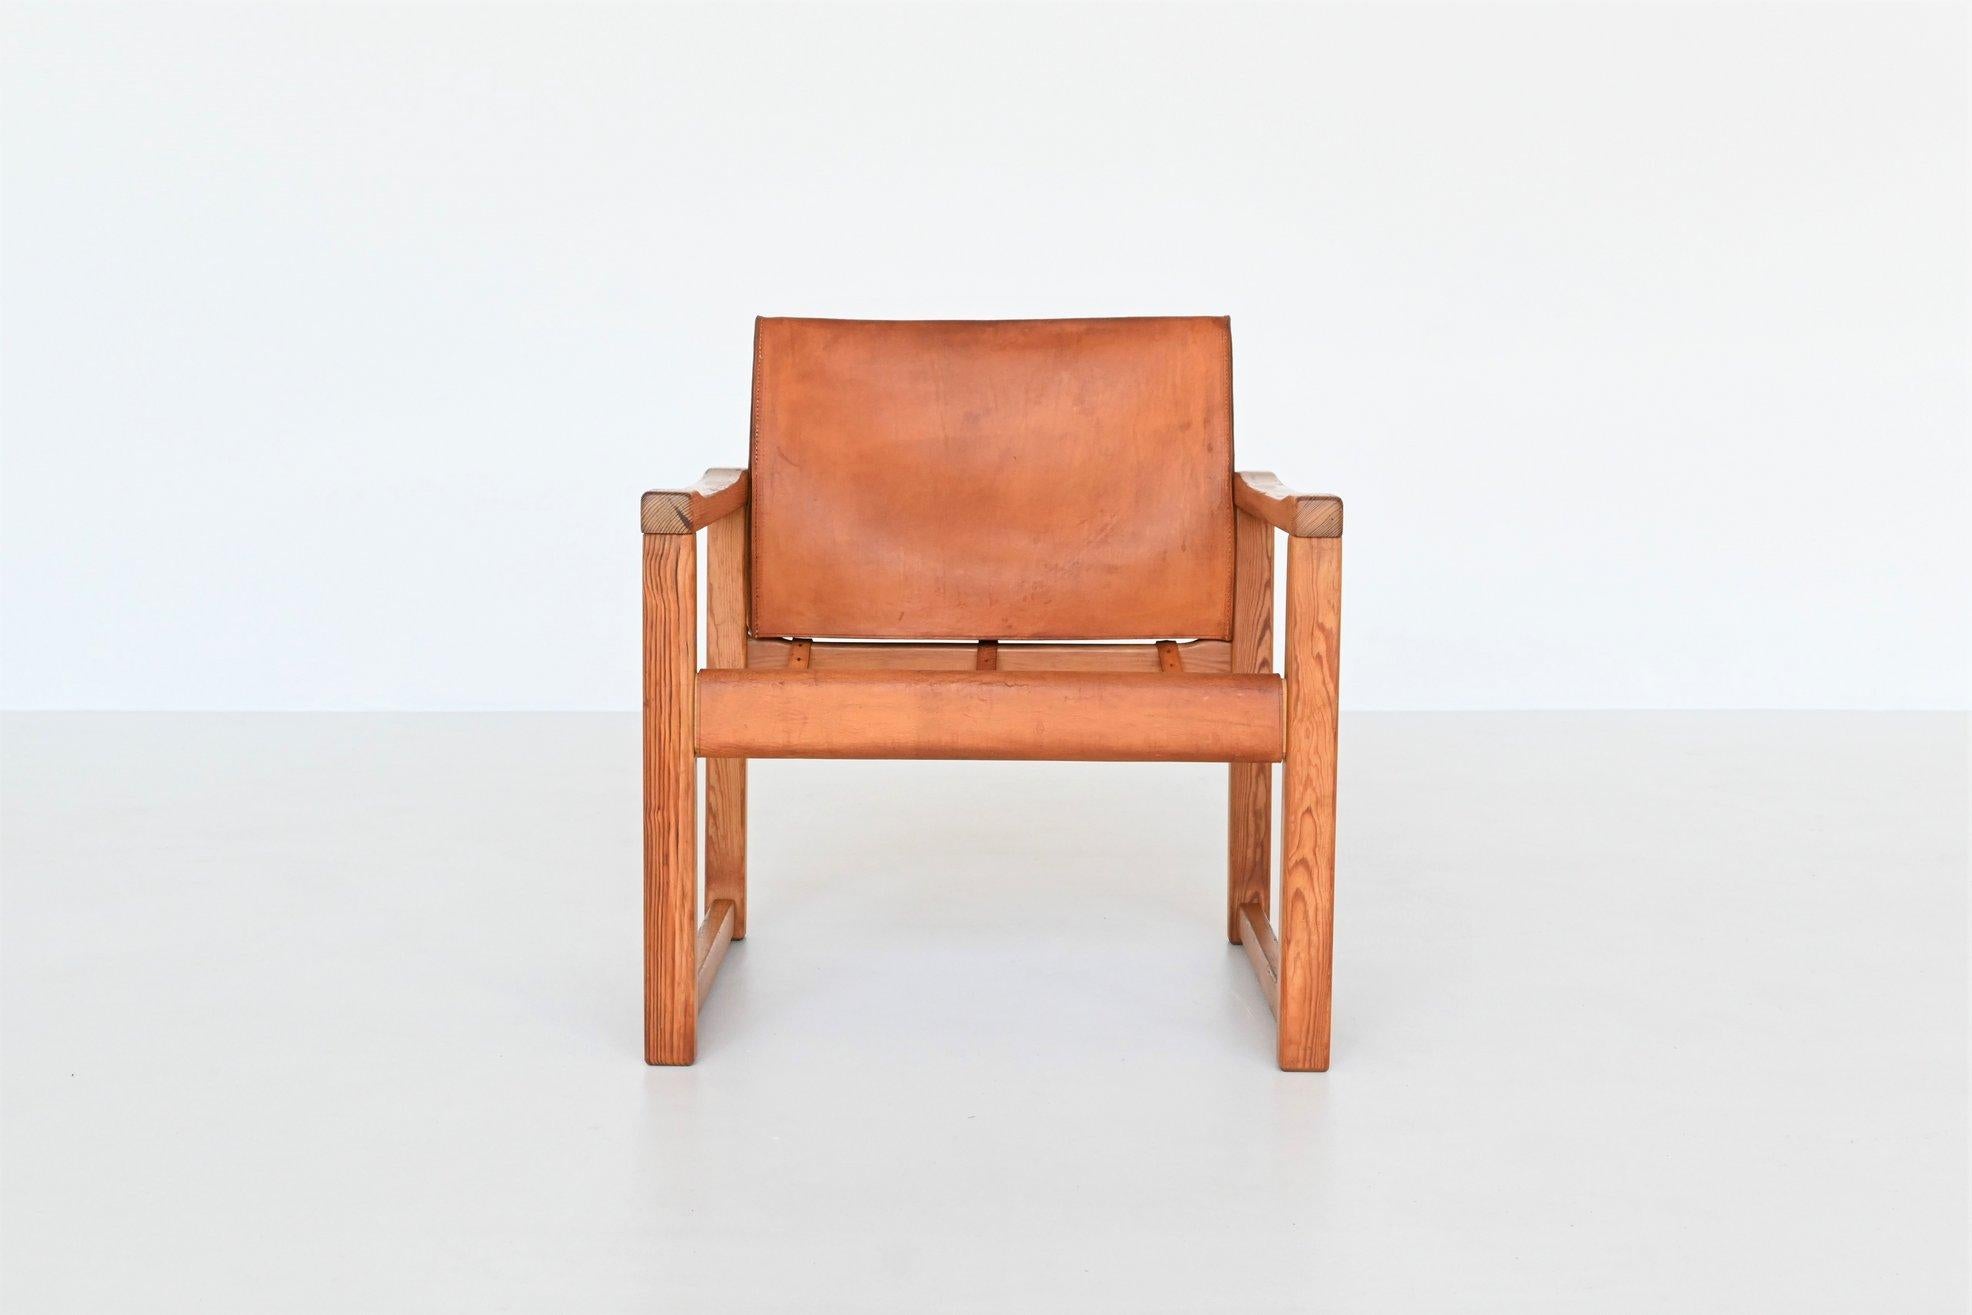 Beautiful elegant Safari lounge chair model Diana designed by Karin Mobring for IKEA, Sweden 1970. This chair has a solid pine wooden frame with original cognac saddle leather seating. The straps at the back give the chairs a particularly tough